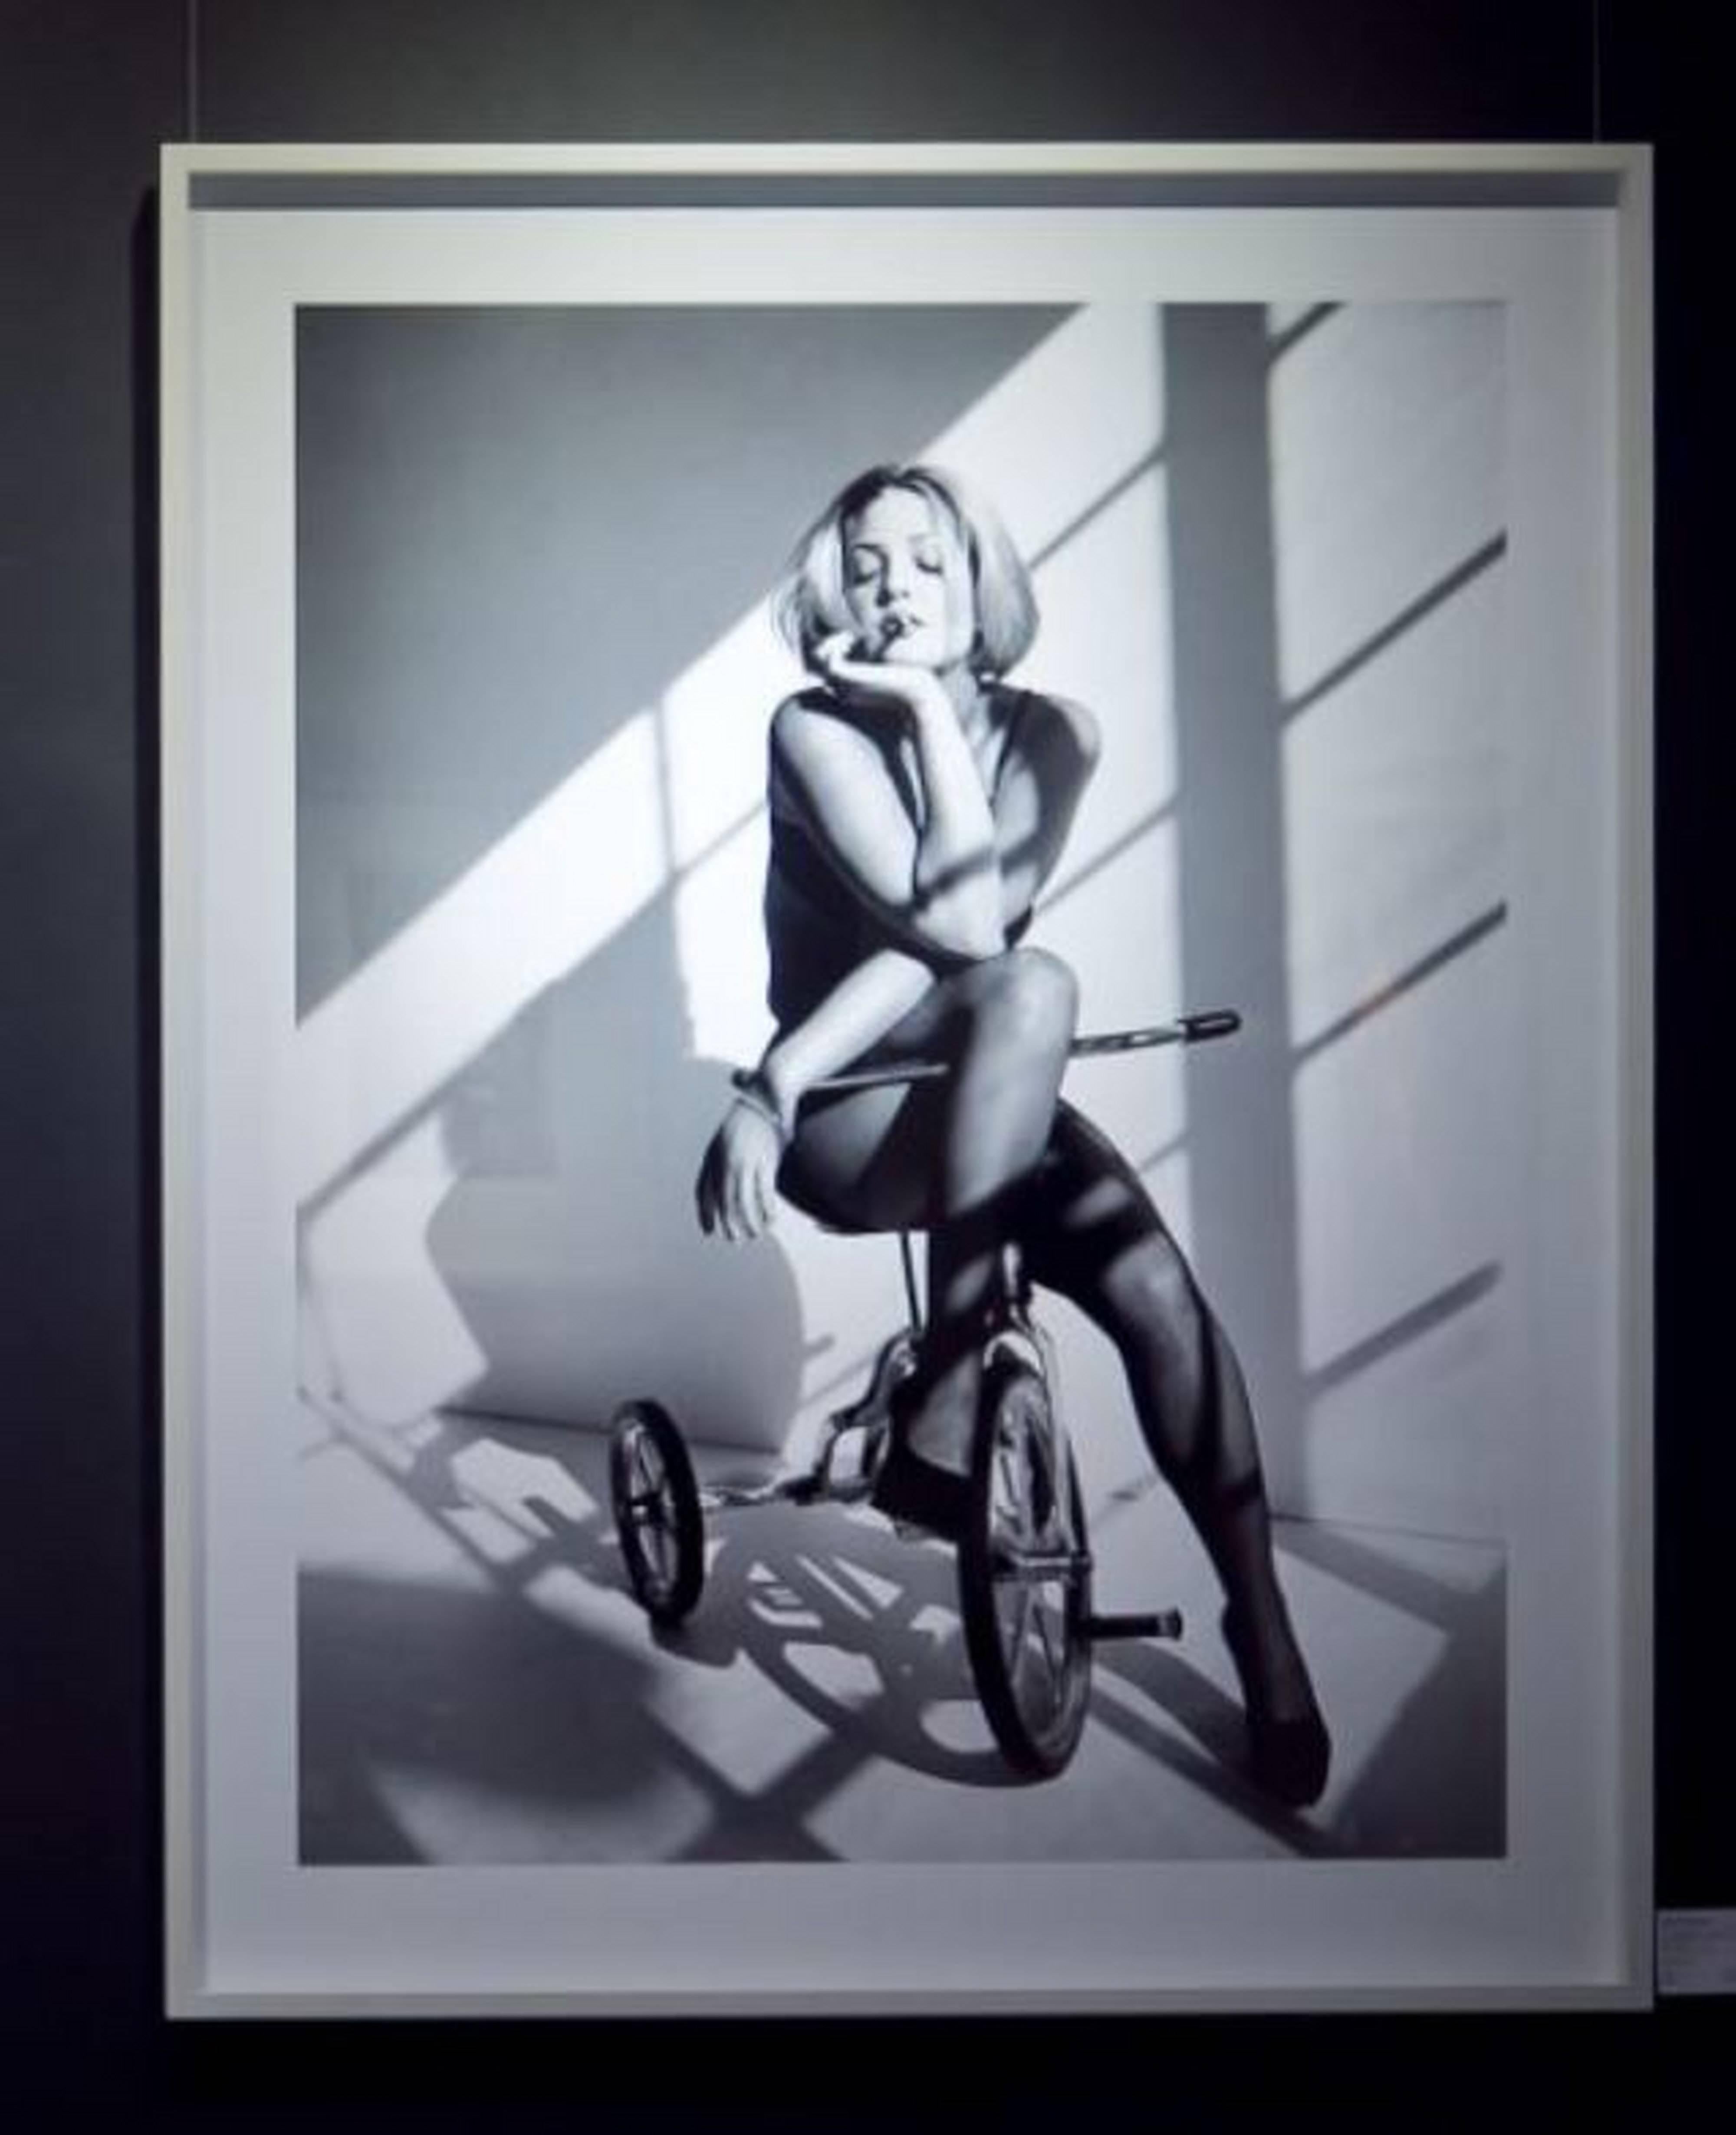 Drew Barrymore - portrait smoking on a tricycle, fine art photography, 1993 - Photograph by Sante D´ Orazio